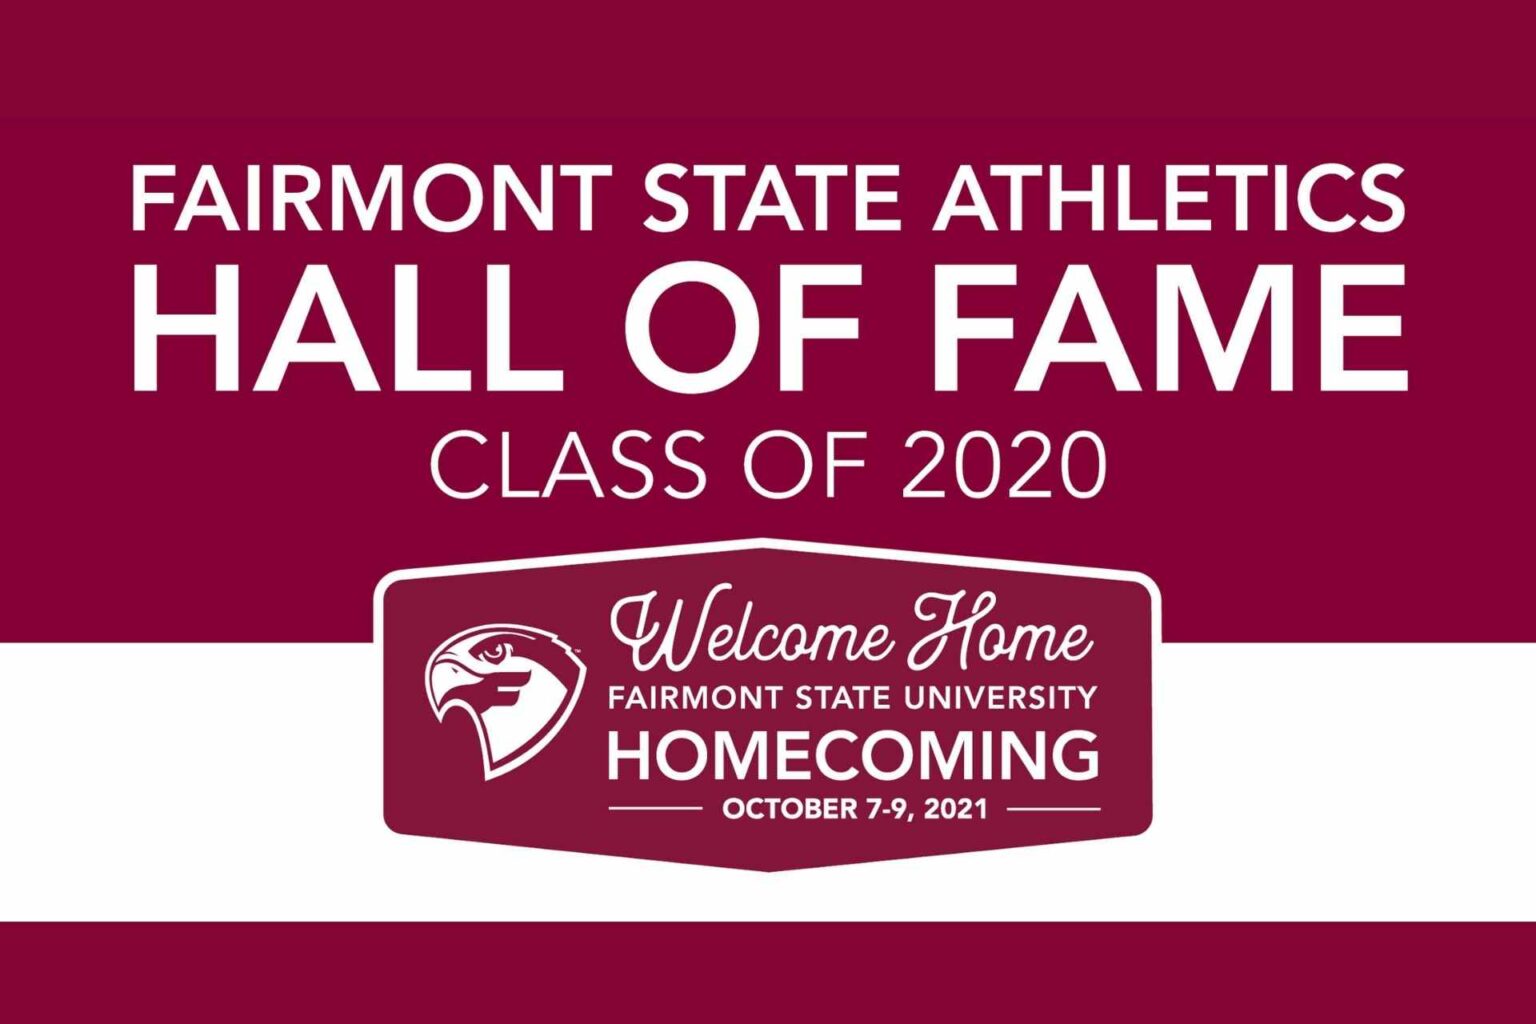 Fairmont State to honor Athletics Hall of Fame Class of 2020 during